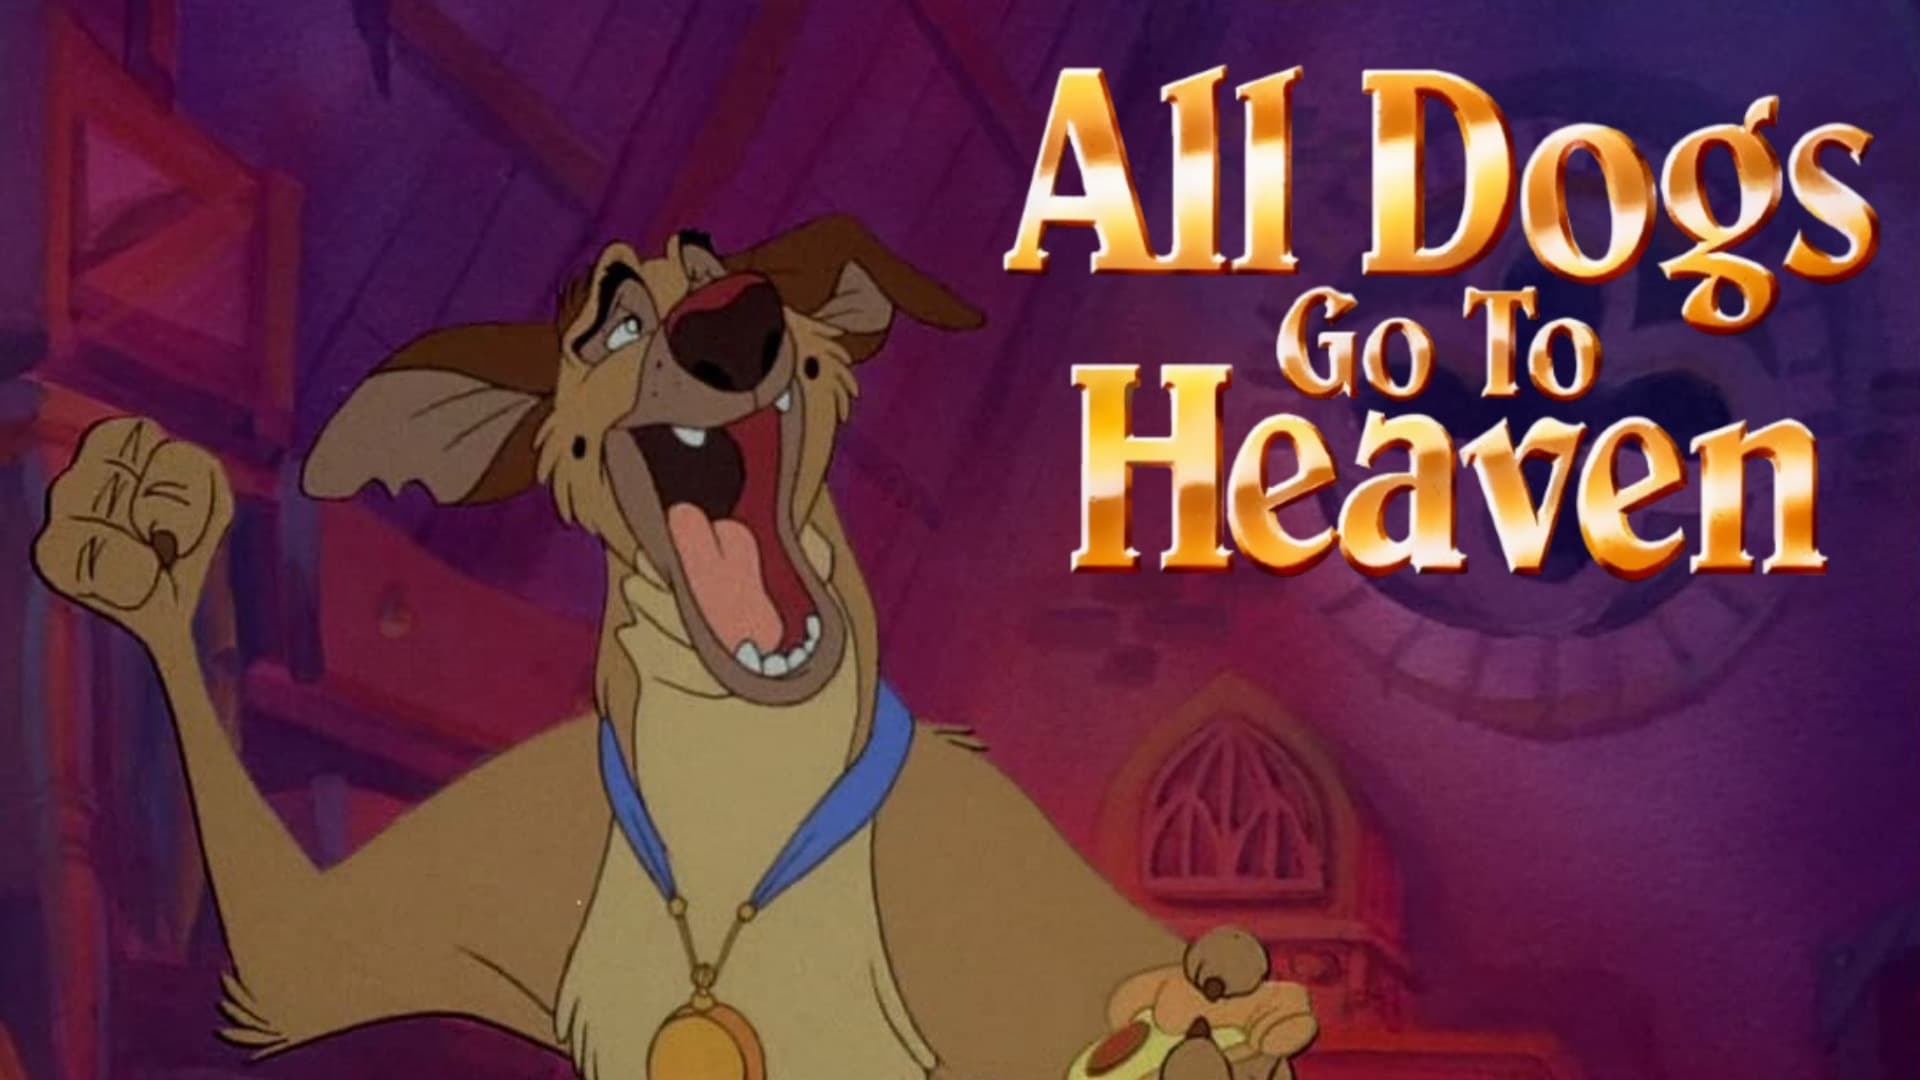 All Dogs Go to Heaven (1989)